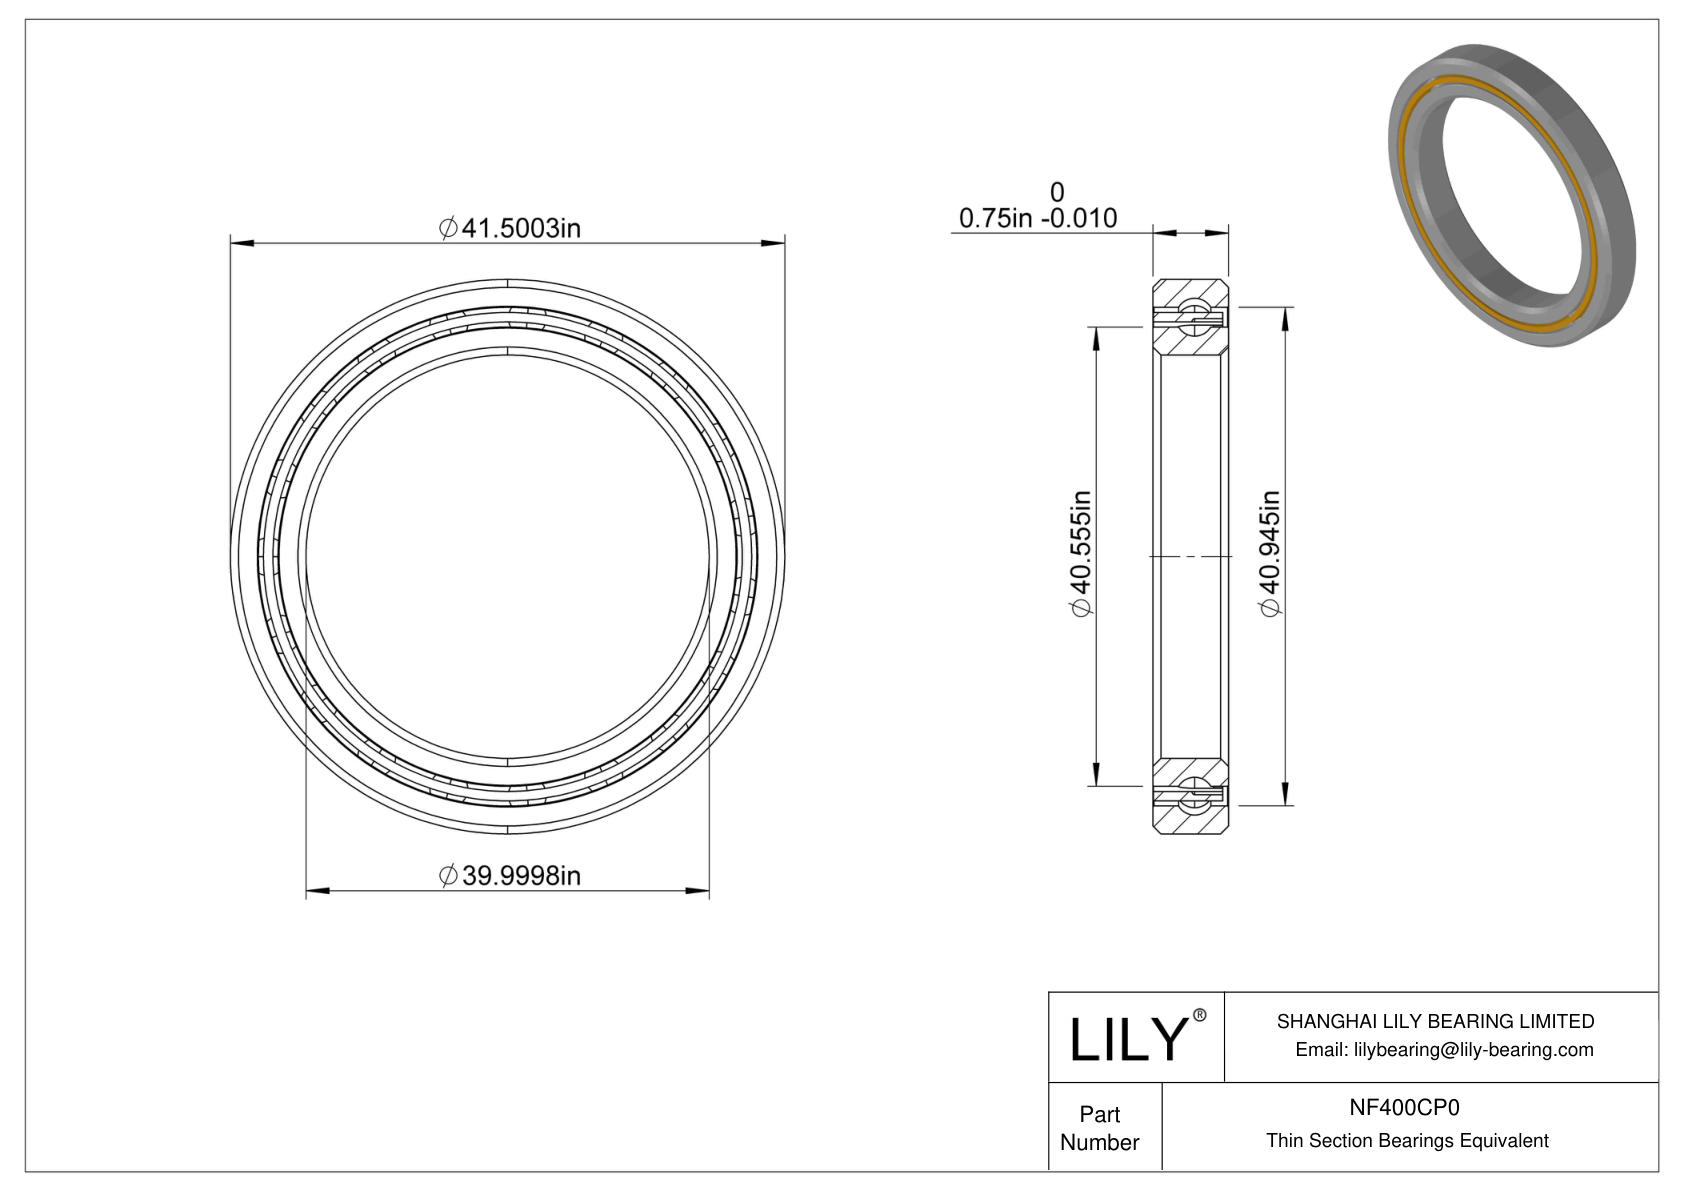 NF400CP0 Constant Section (CS) Bearings cad drawing